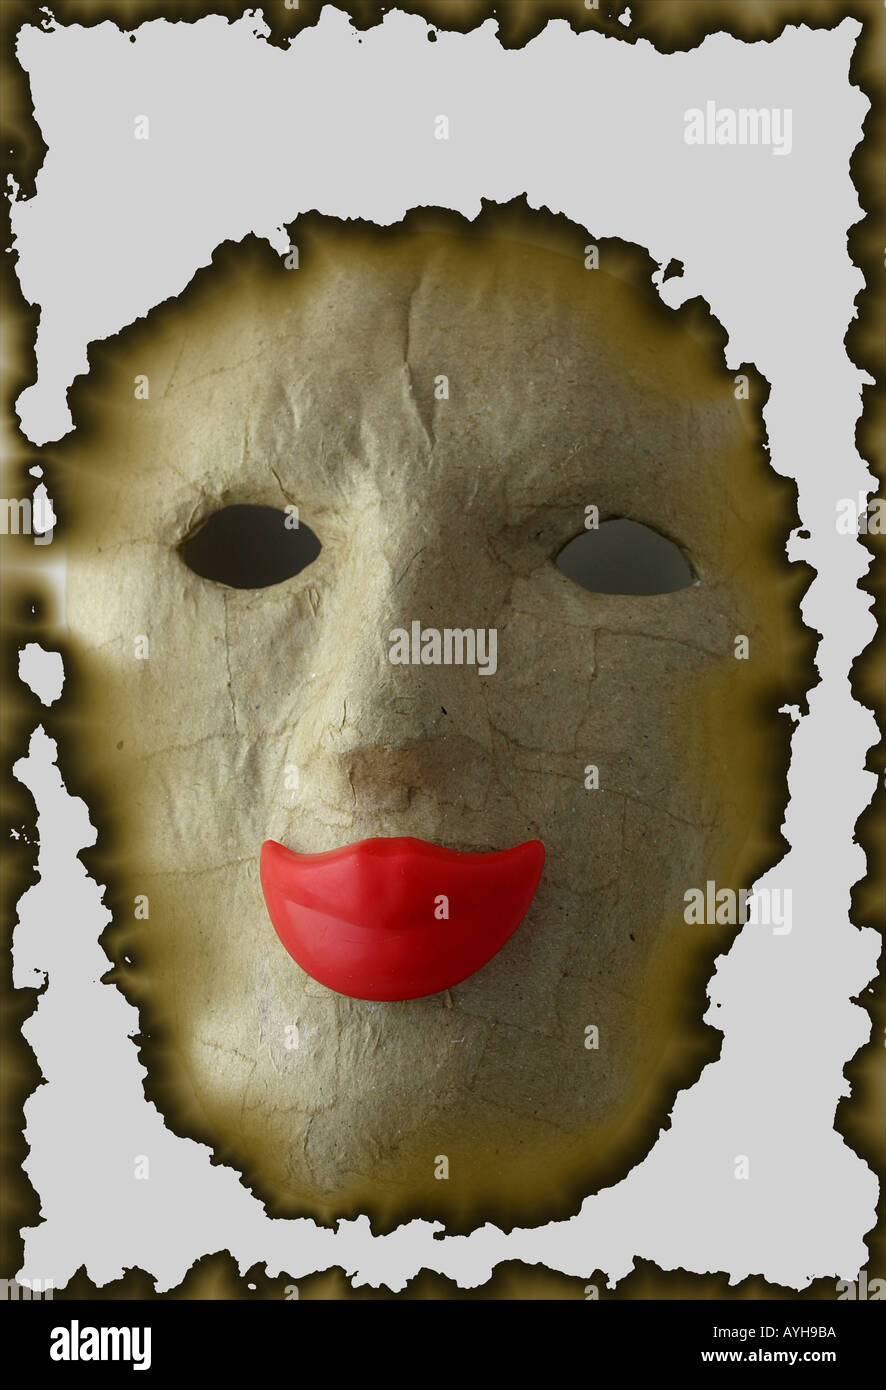 Face mask with smiling red lips and burnt out surrounding and background Stock Photo